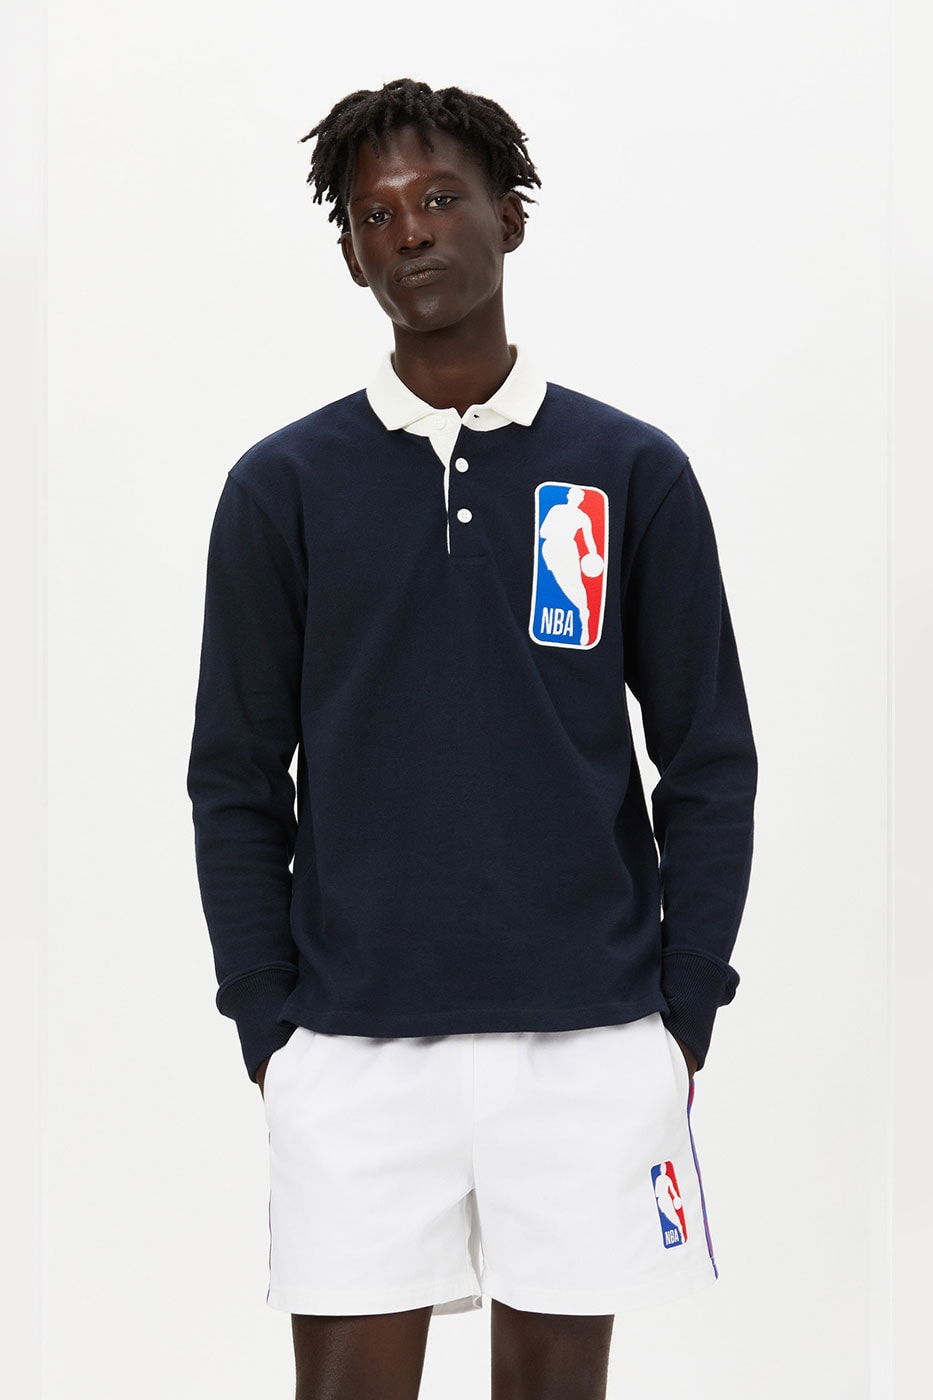 Rowing Blazers Celebrates the Start of the NBA Season With Second Capsule Collaboration